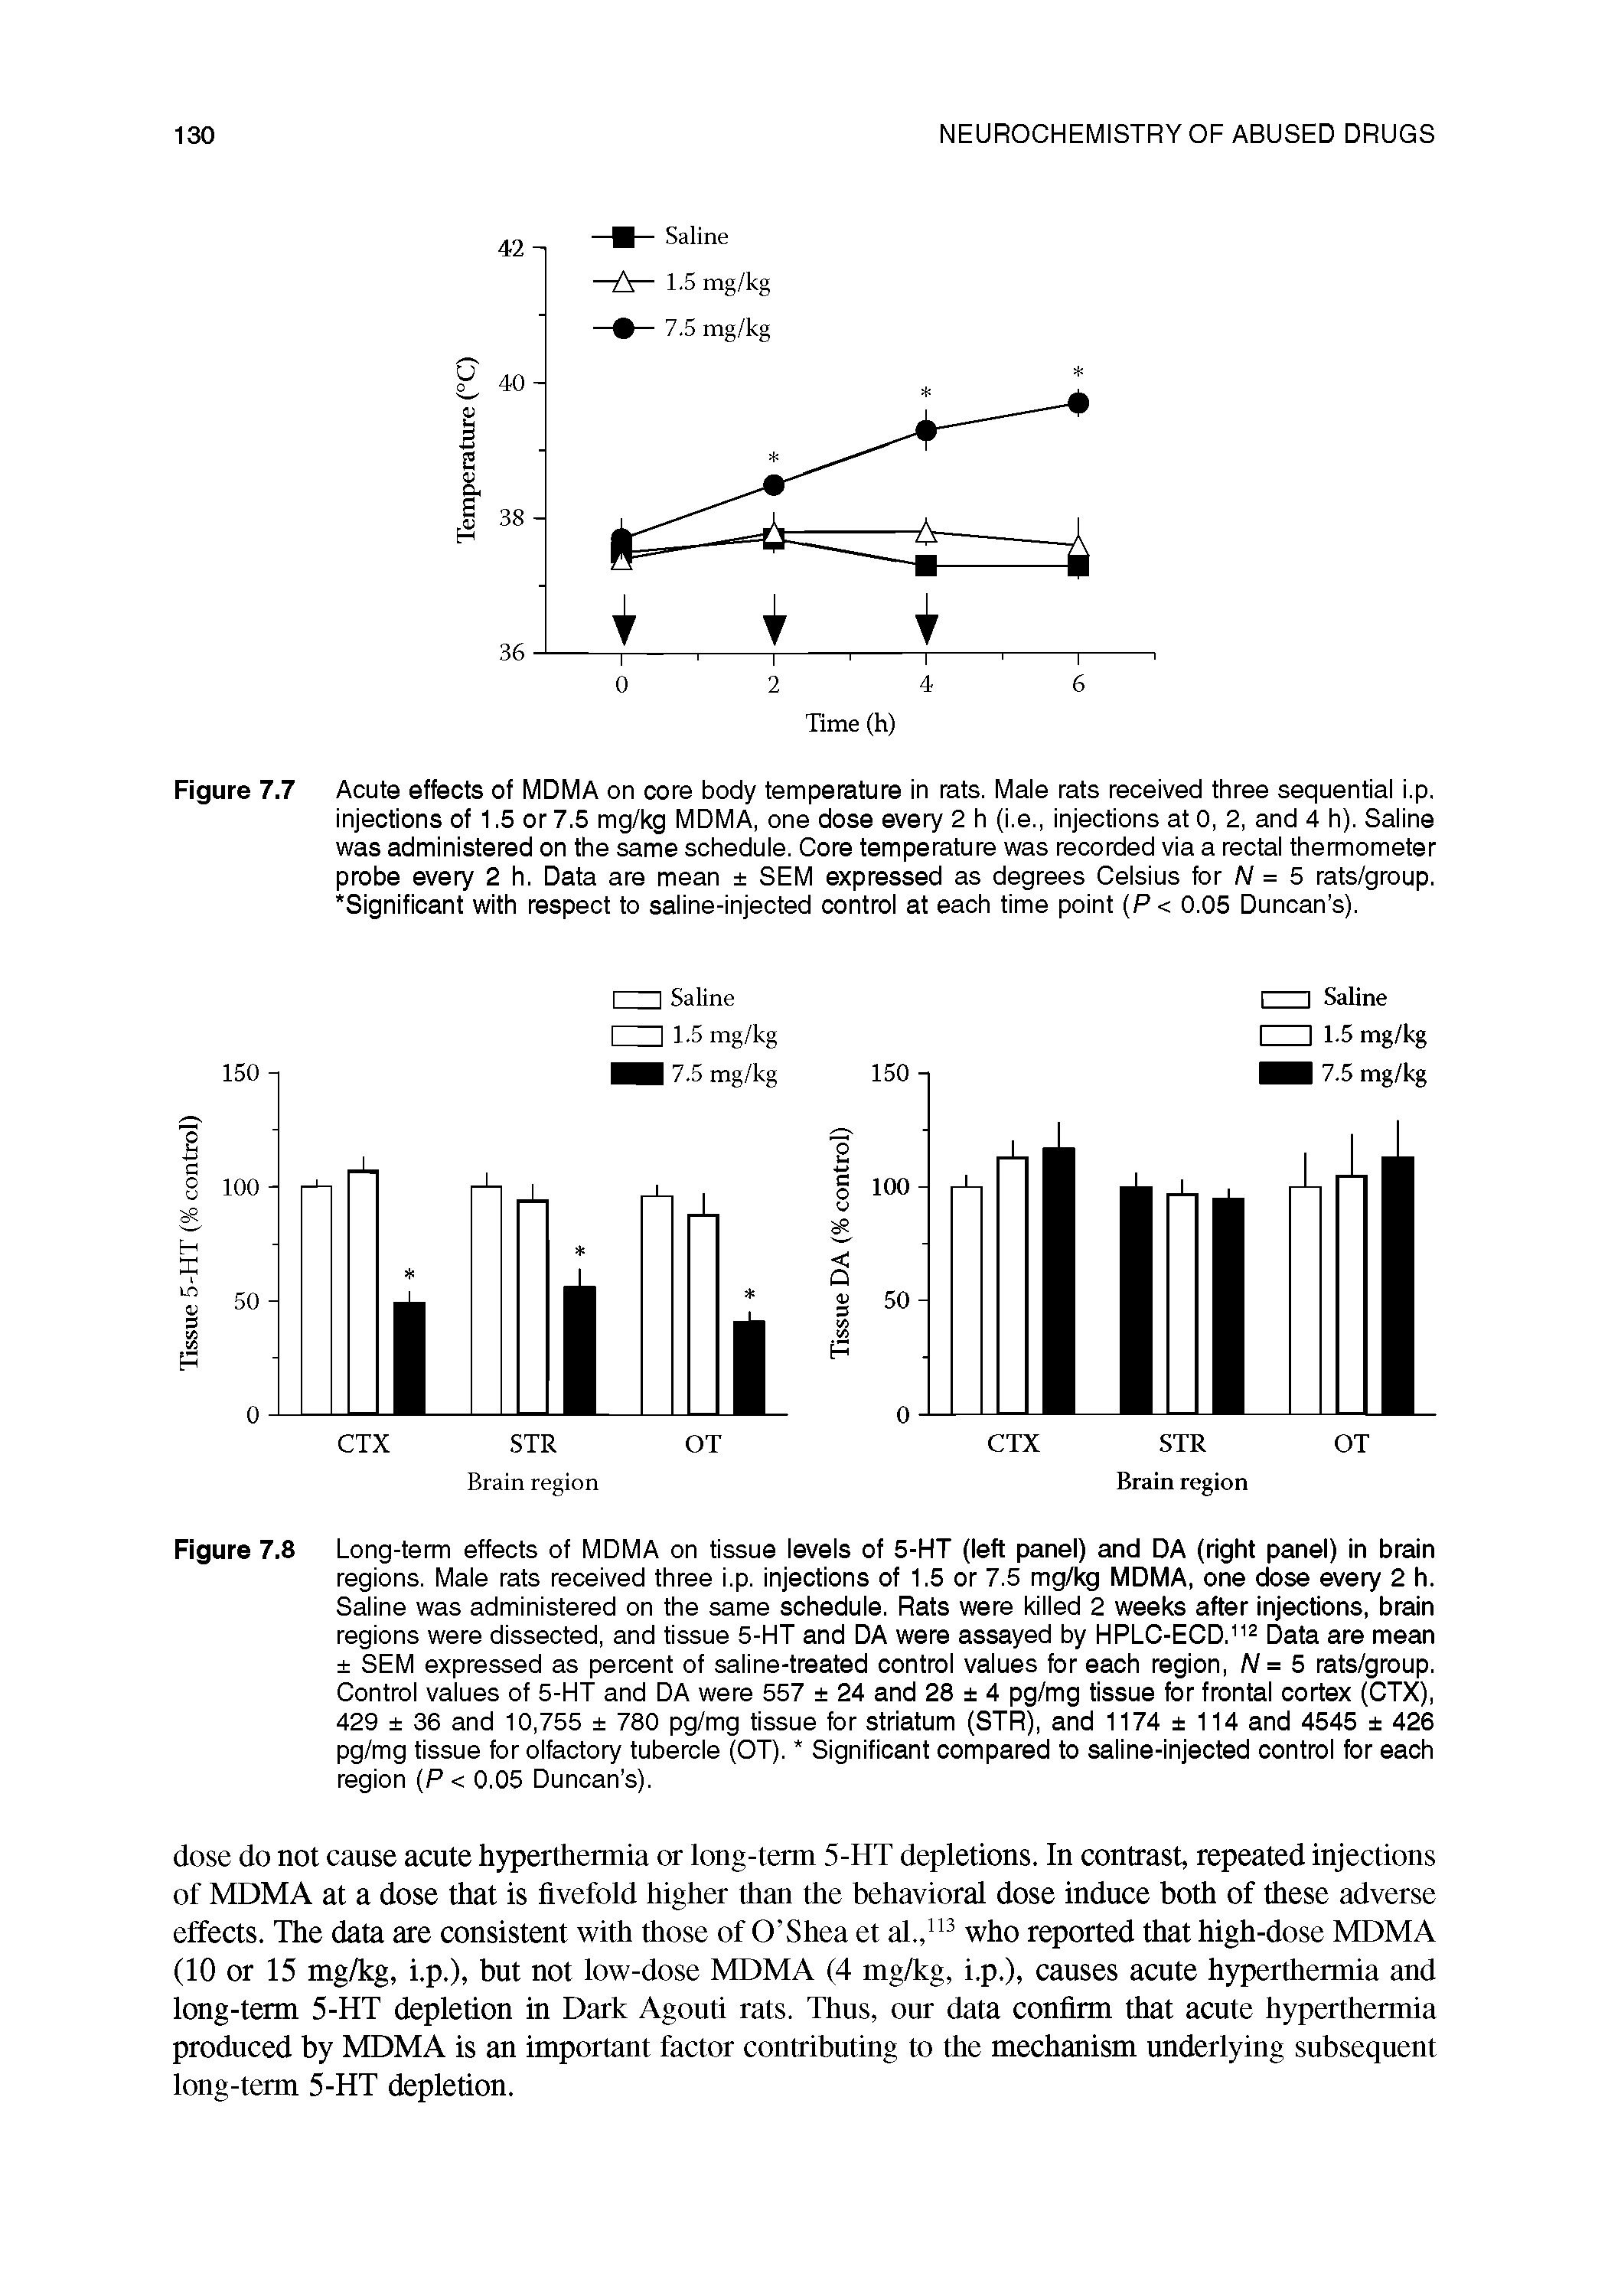 Figure 7.8 Long-term effects of MDMA on tissue levels of 5-HT (left panel) and DA (right panel) in brain regions. Male rats received three i.p. injections of 1.5 or 7.5 mg/kg MDMA, one dose every 2 h. Saline was administered on the same schedule. Rats were killed 2 weeks after injections, brain regions were dissected, and tissue 5-HT and DA were assayed by HPLC-ECD.112 Data are mean SEM expressed as percent of saline-treated control values for each region, N = 5 rats/group. Control values of 5-HT and DA were 557 24 and 28 4 pg/mg tissue for frontal cortex (CTX), 429 36 and 10,755 780 pg/mg tissue for striatum (STR), and 1174 114 and 4545 426 pg/mg tissue for olfactory tubercle (OT). Significant compared to saline-injected control for each region (P < 0.05 Duncan s).